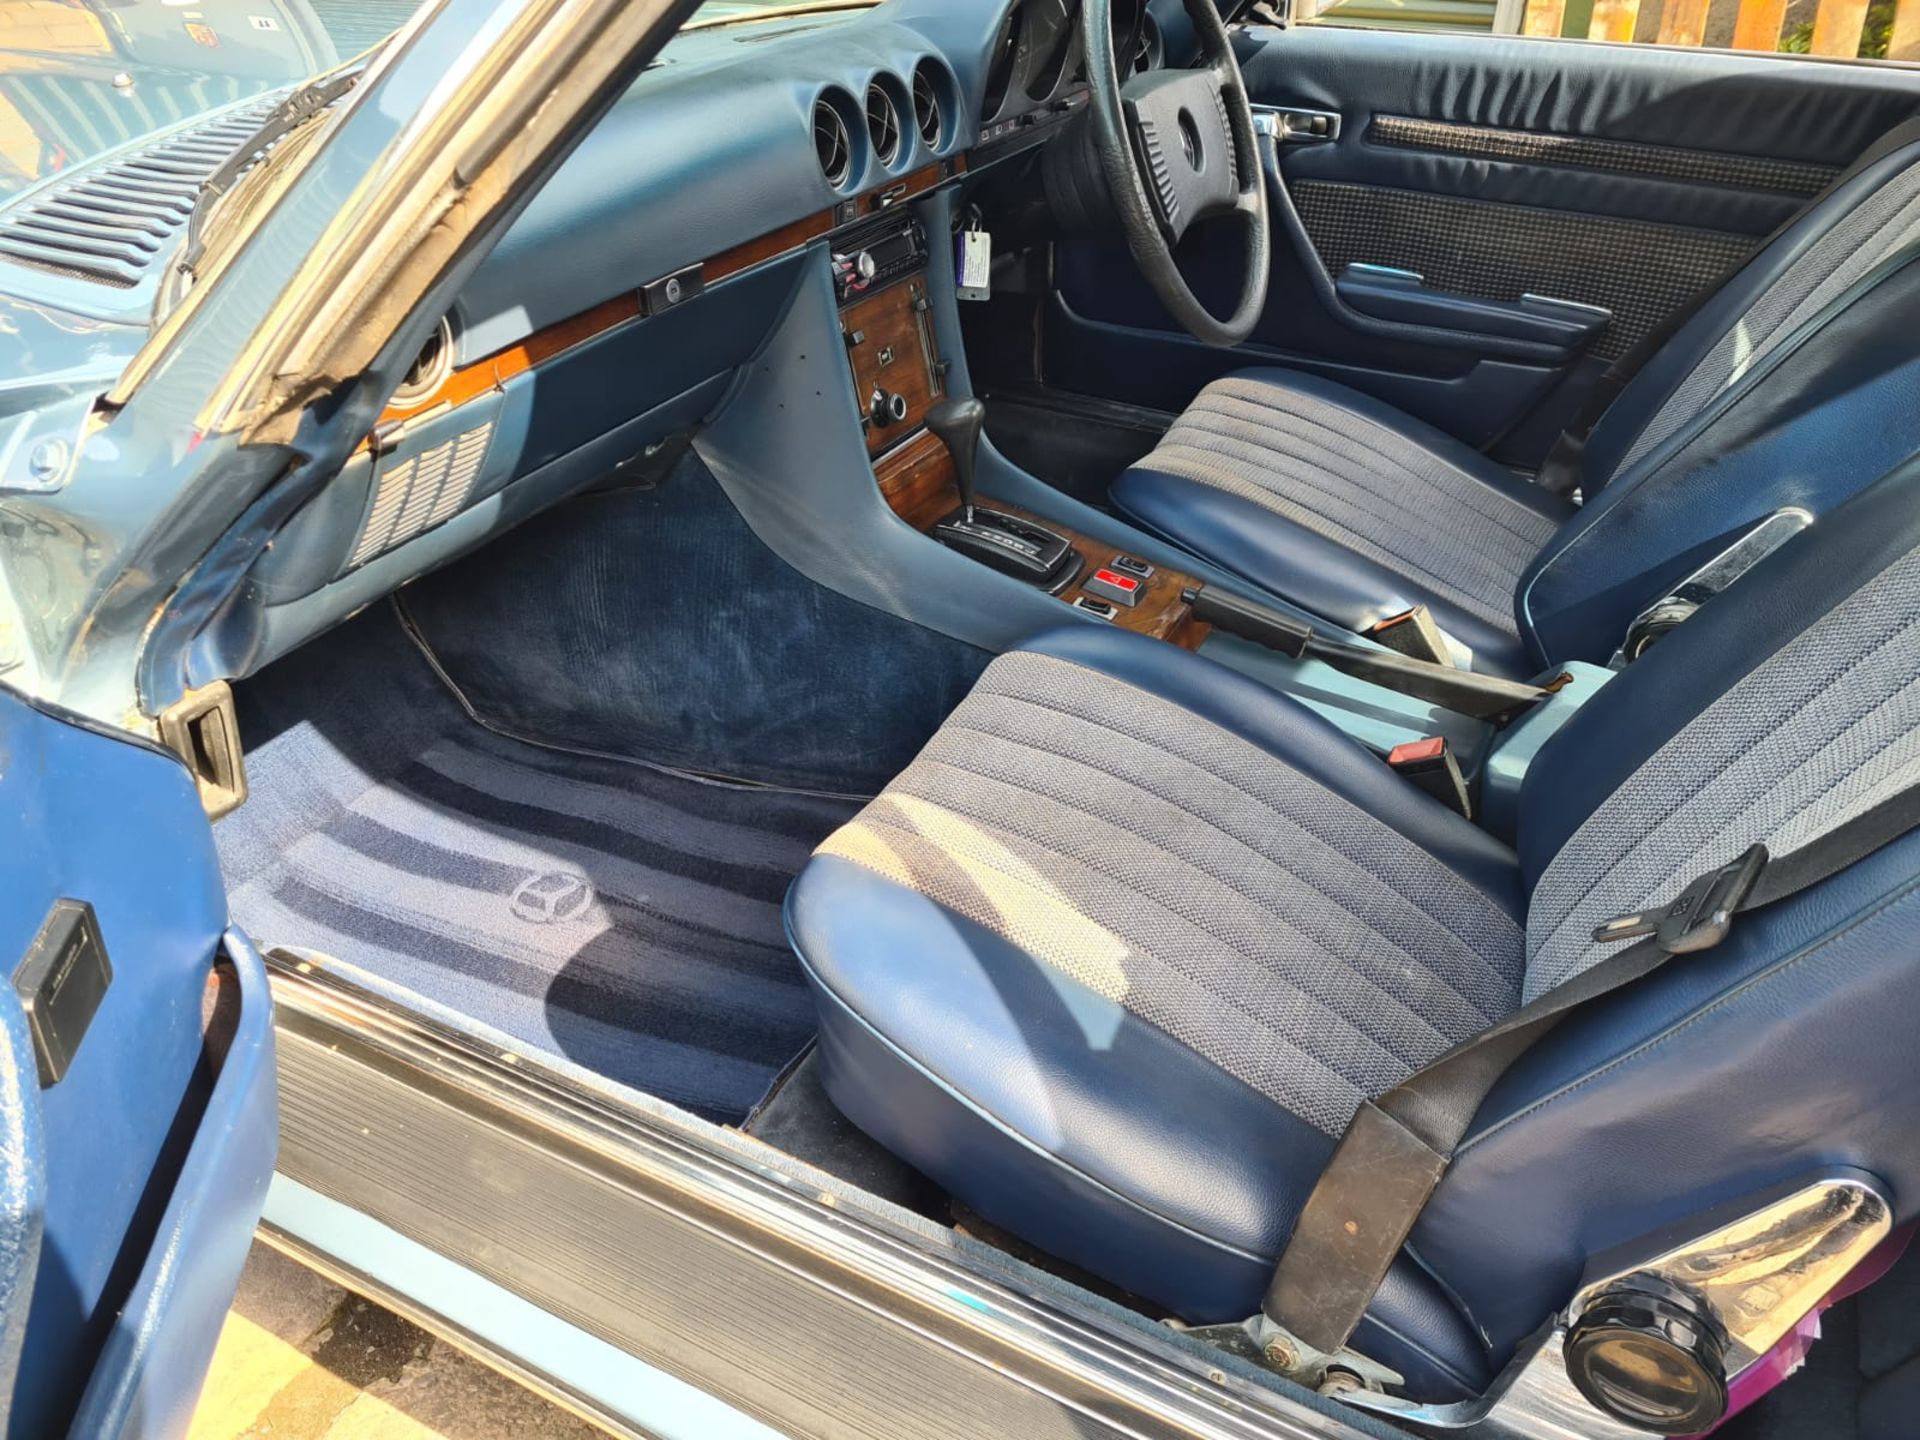 Stunning 1979 Mercedes Benz SL350 V8 With Factory Hardtop - Restored in 2018 - Image 2 of 22